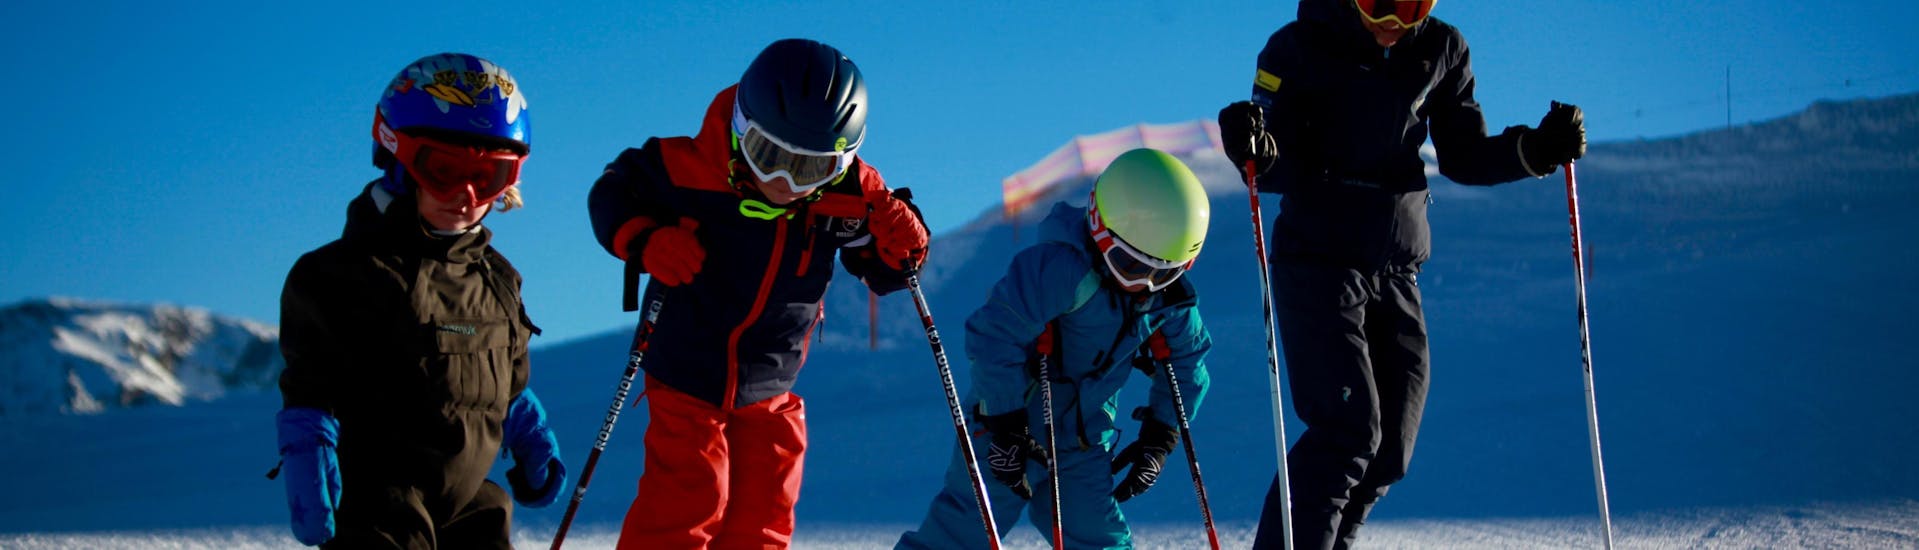 Private Ski Lessons for Kids &amp; Teens of All Ages - Afternoon with Ski School PassionSki - St. Moritz - Hero image